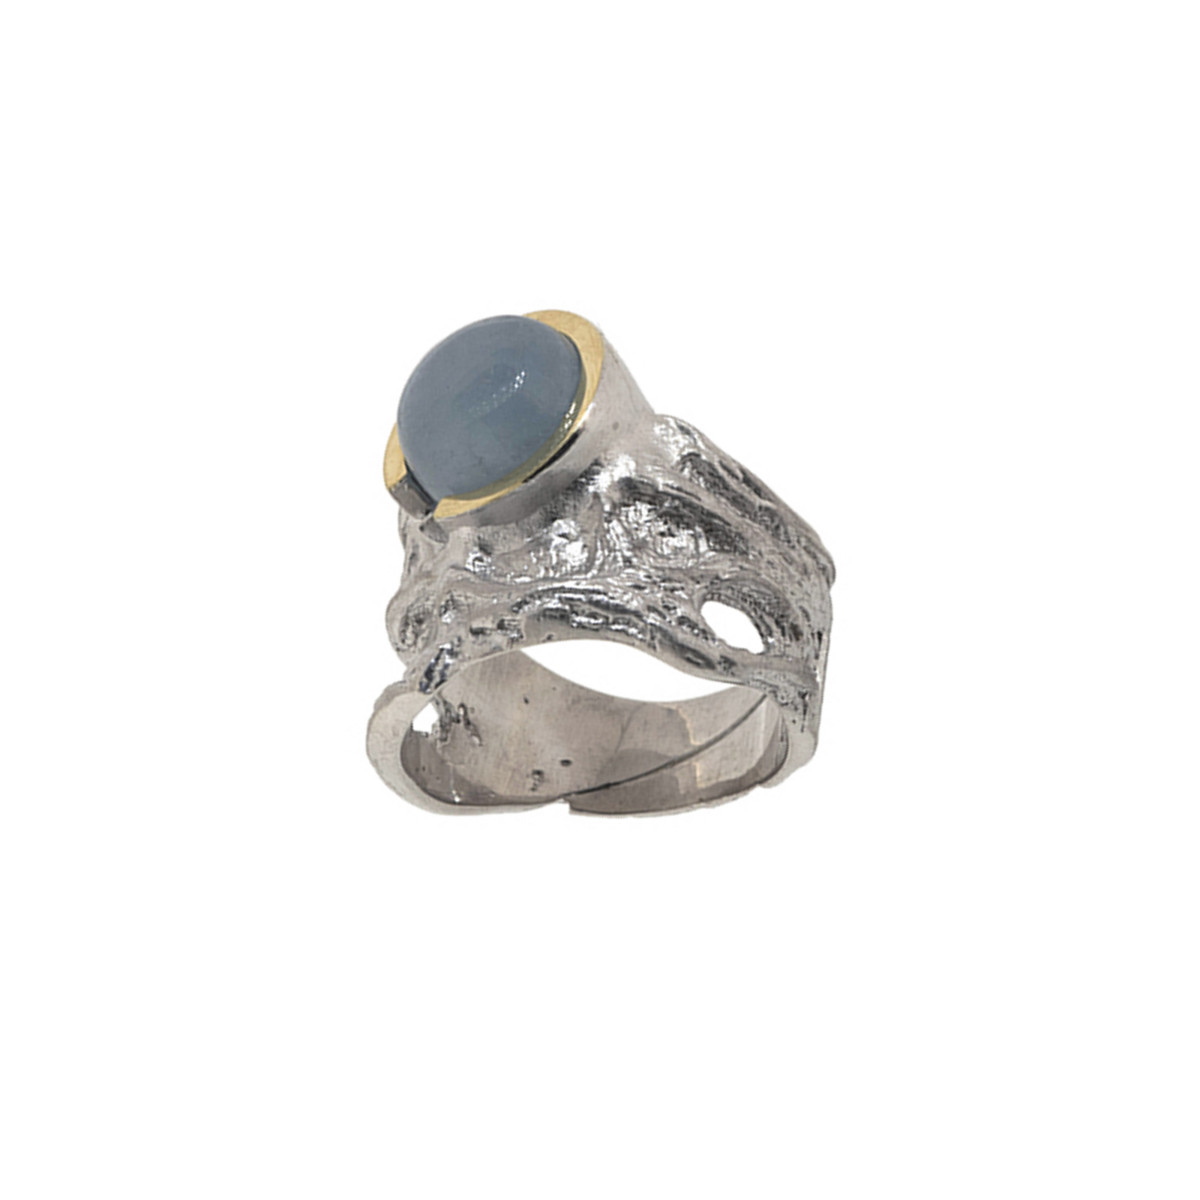 Silver, gold and aquamarine ring